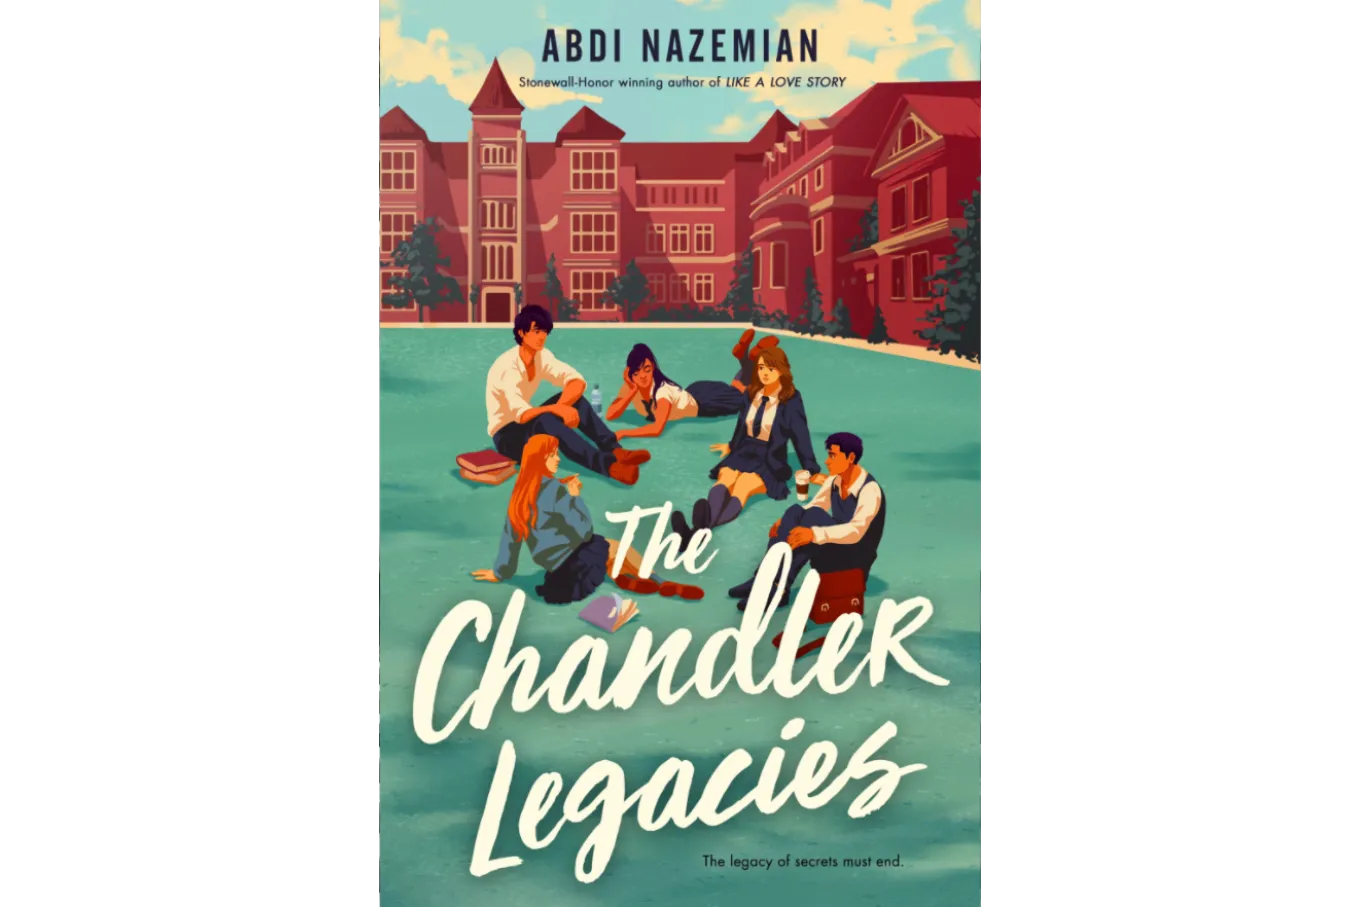 Cover of the Chandler Legacies